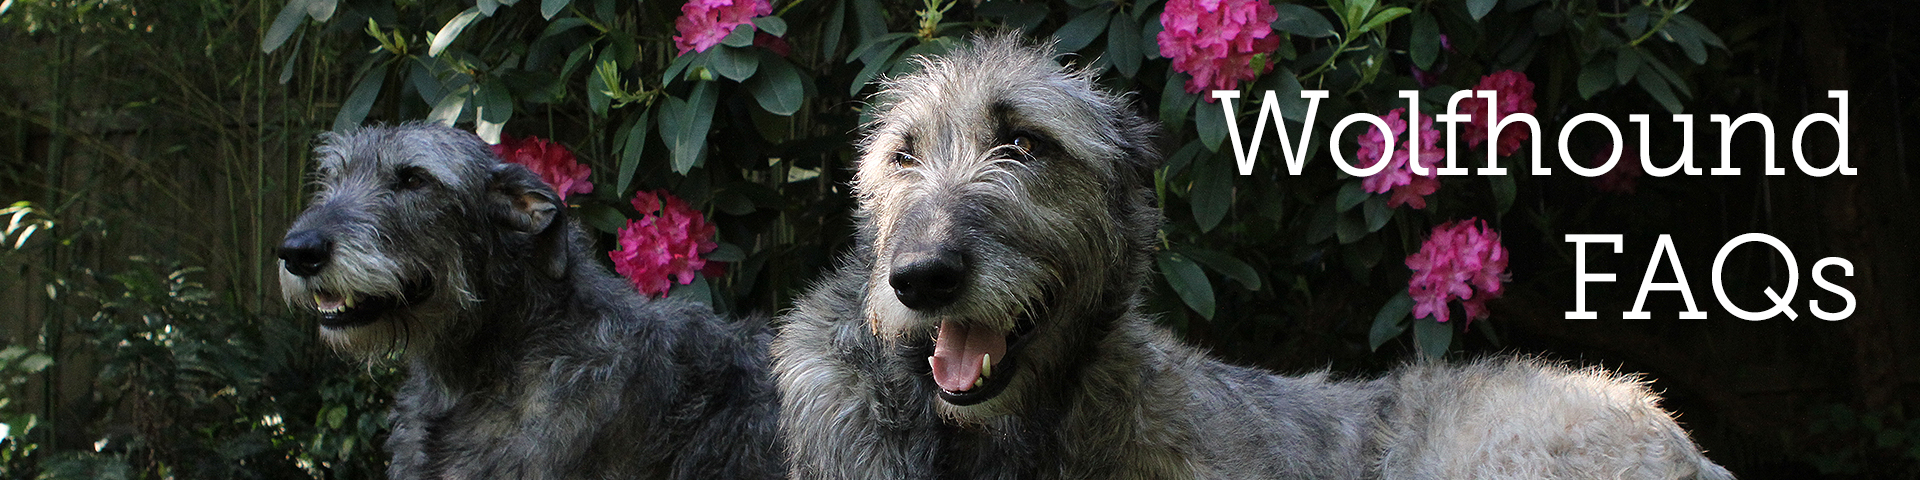 Wolfhound FAQs